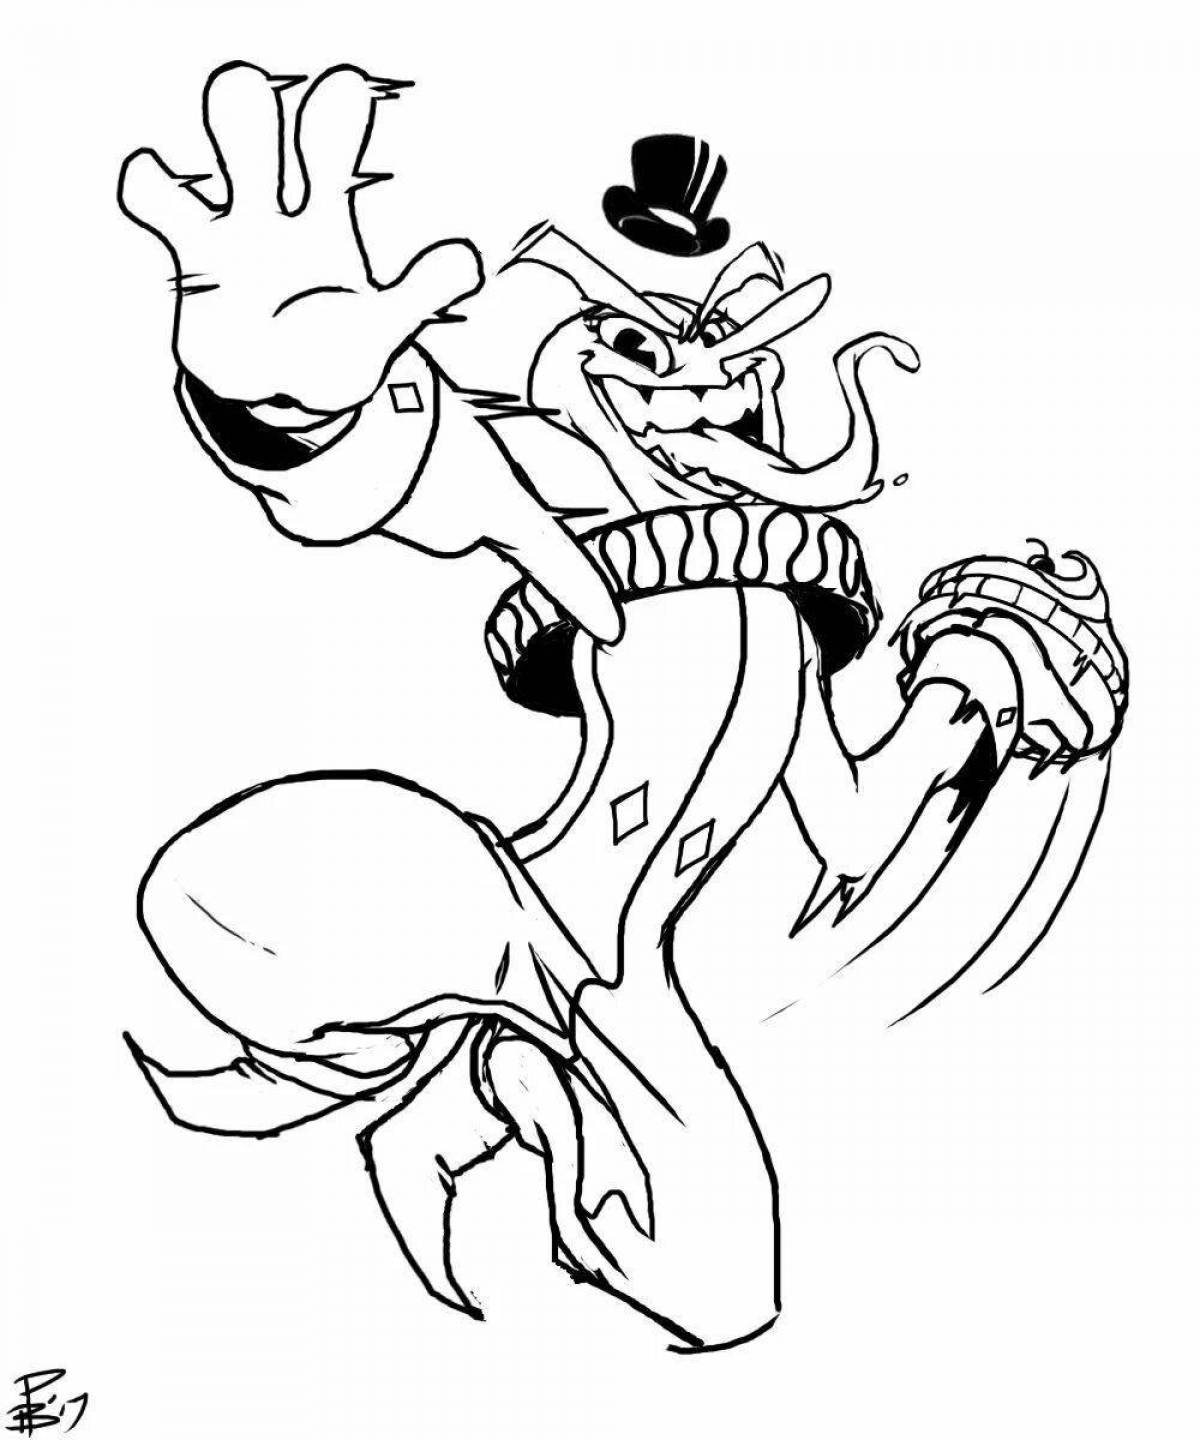 Coloring page of dazzling cuphead bosses